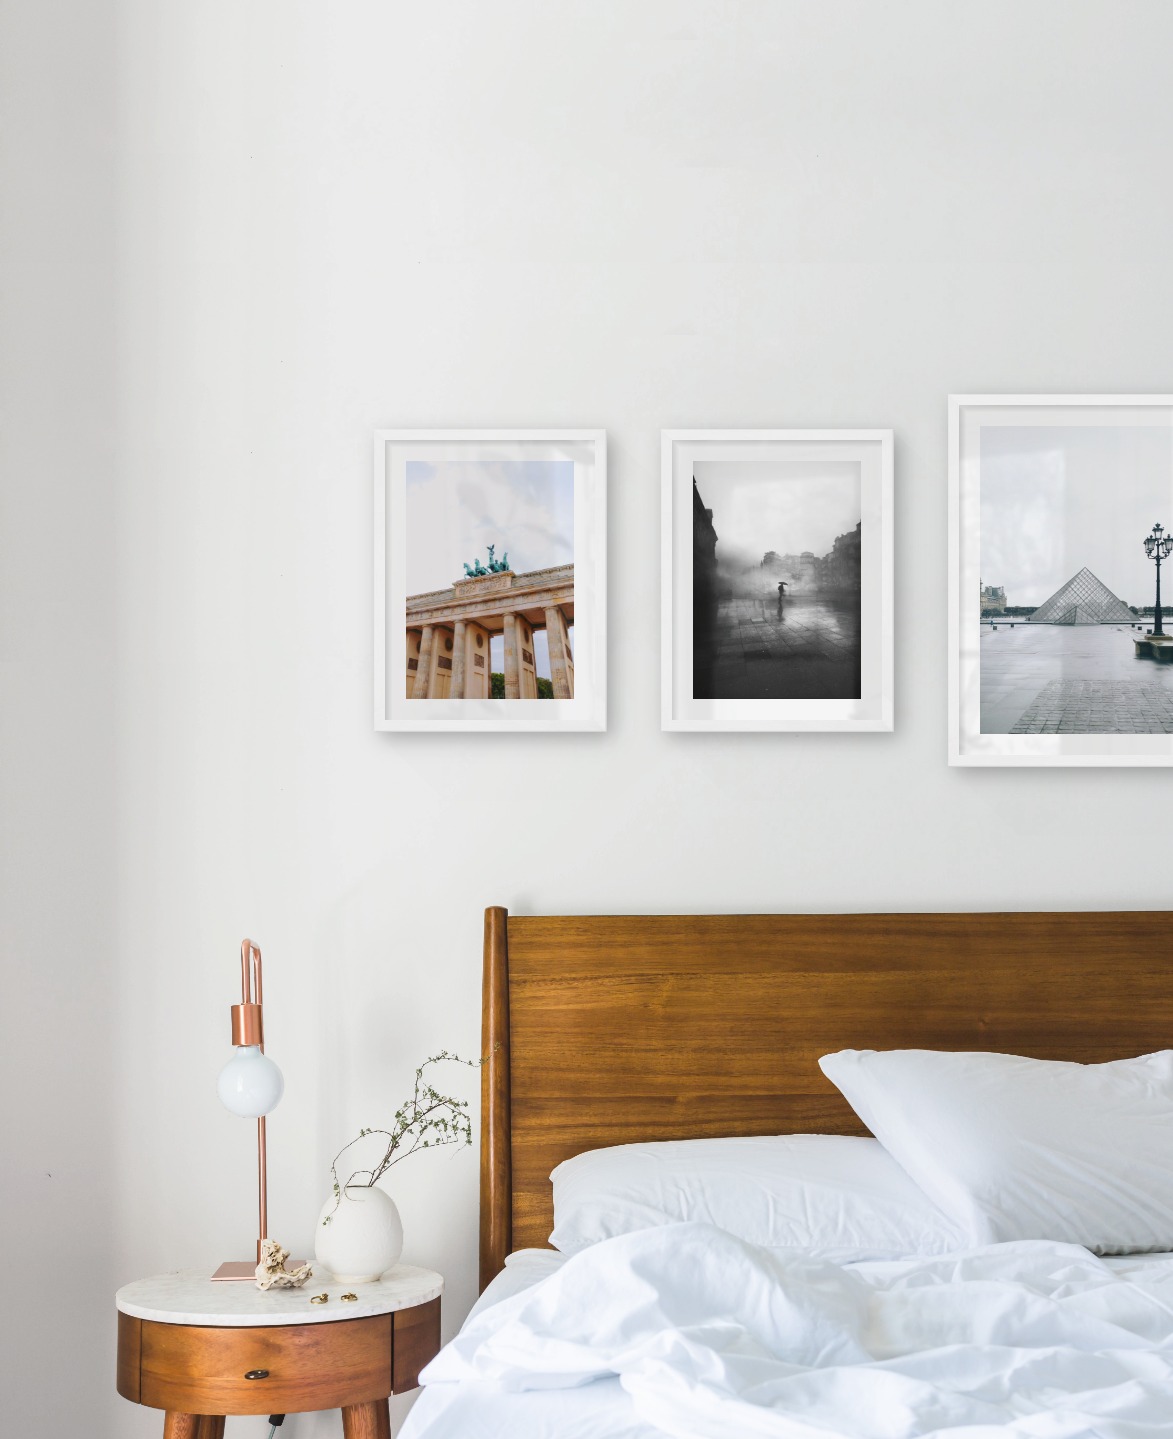 Gallery wall with picture frames in white in sizes 30x40 and 40x50 with prints "Berlin", "Rainy city" and "Louvre in Paris"